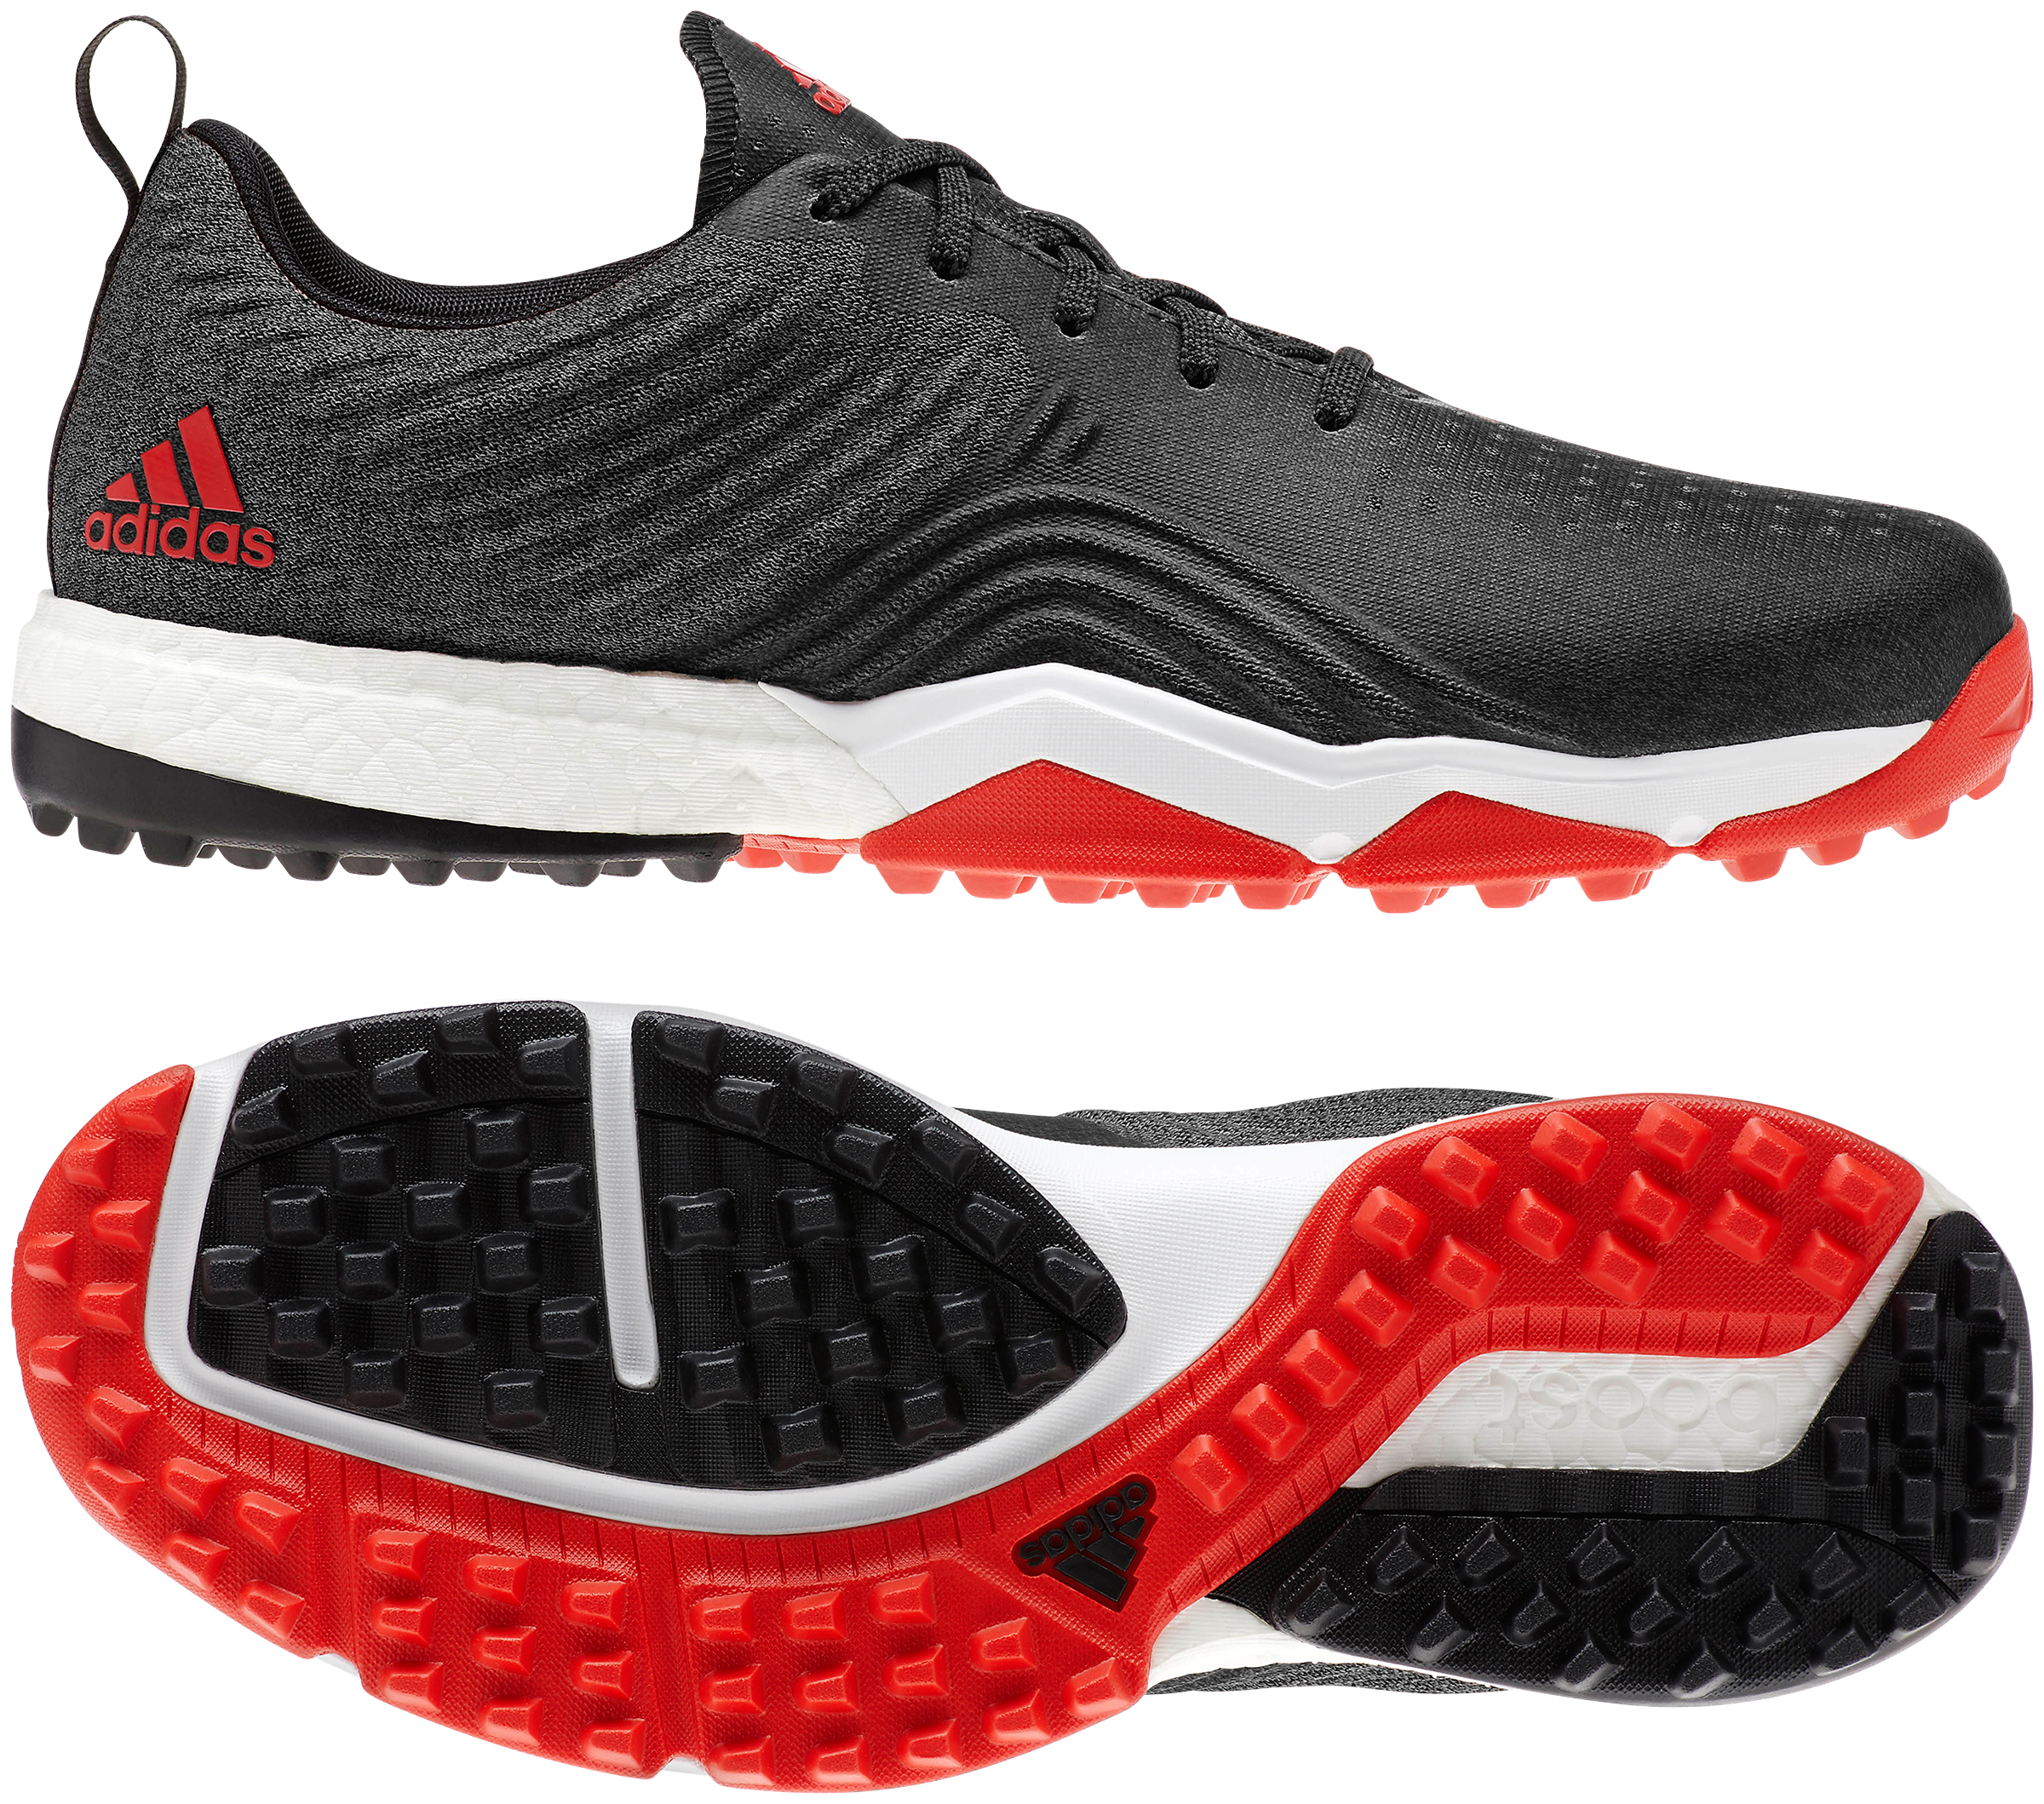 adidas Golf announces changes to new adipower footwear